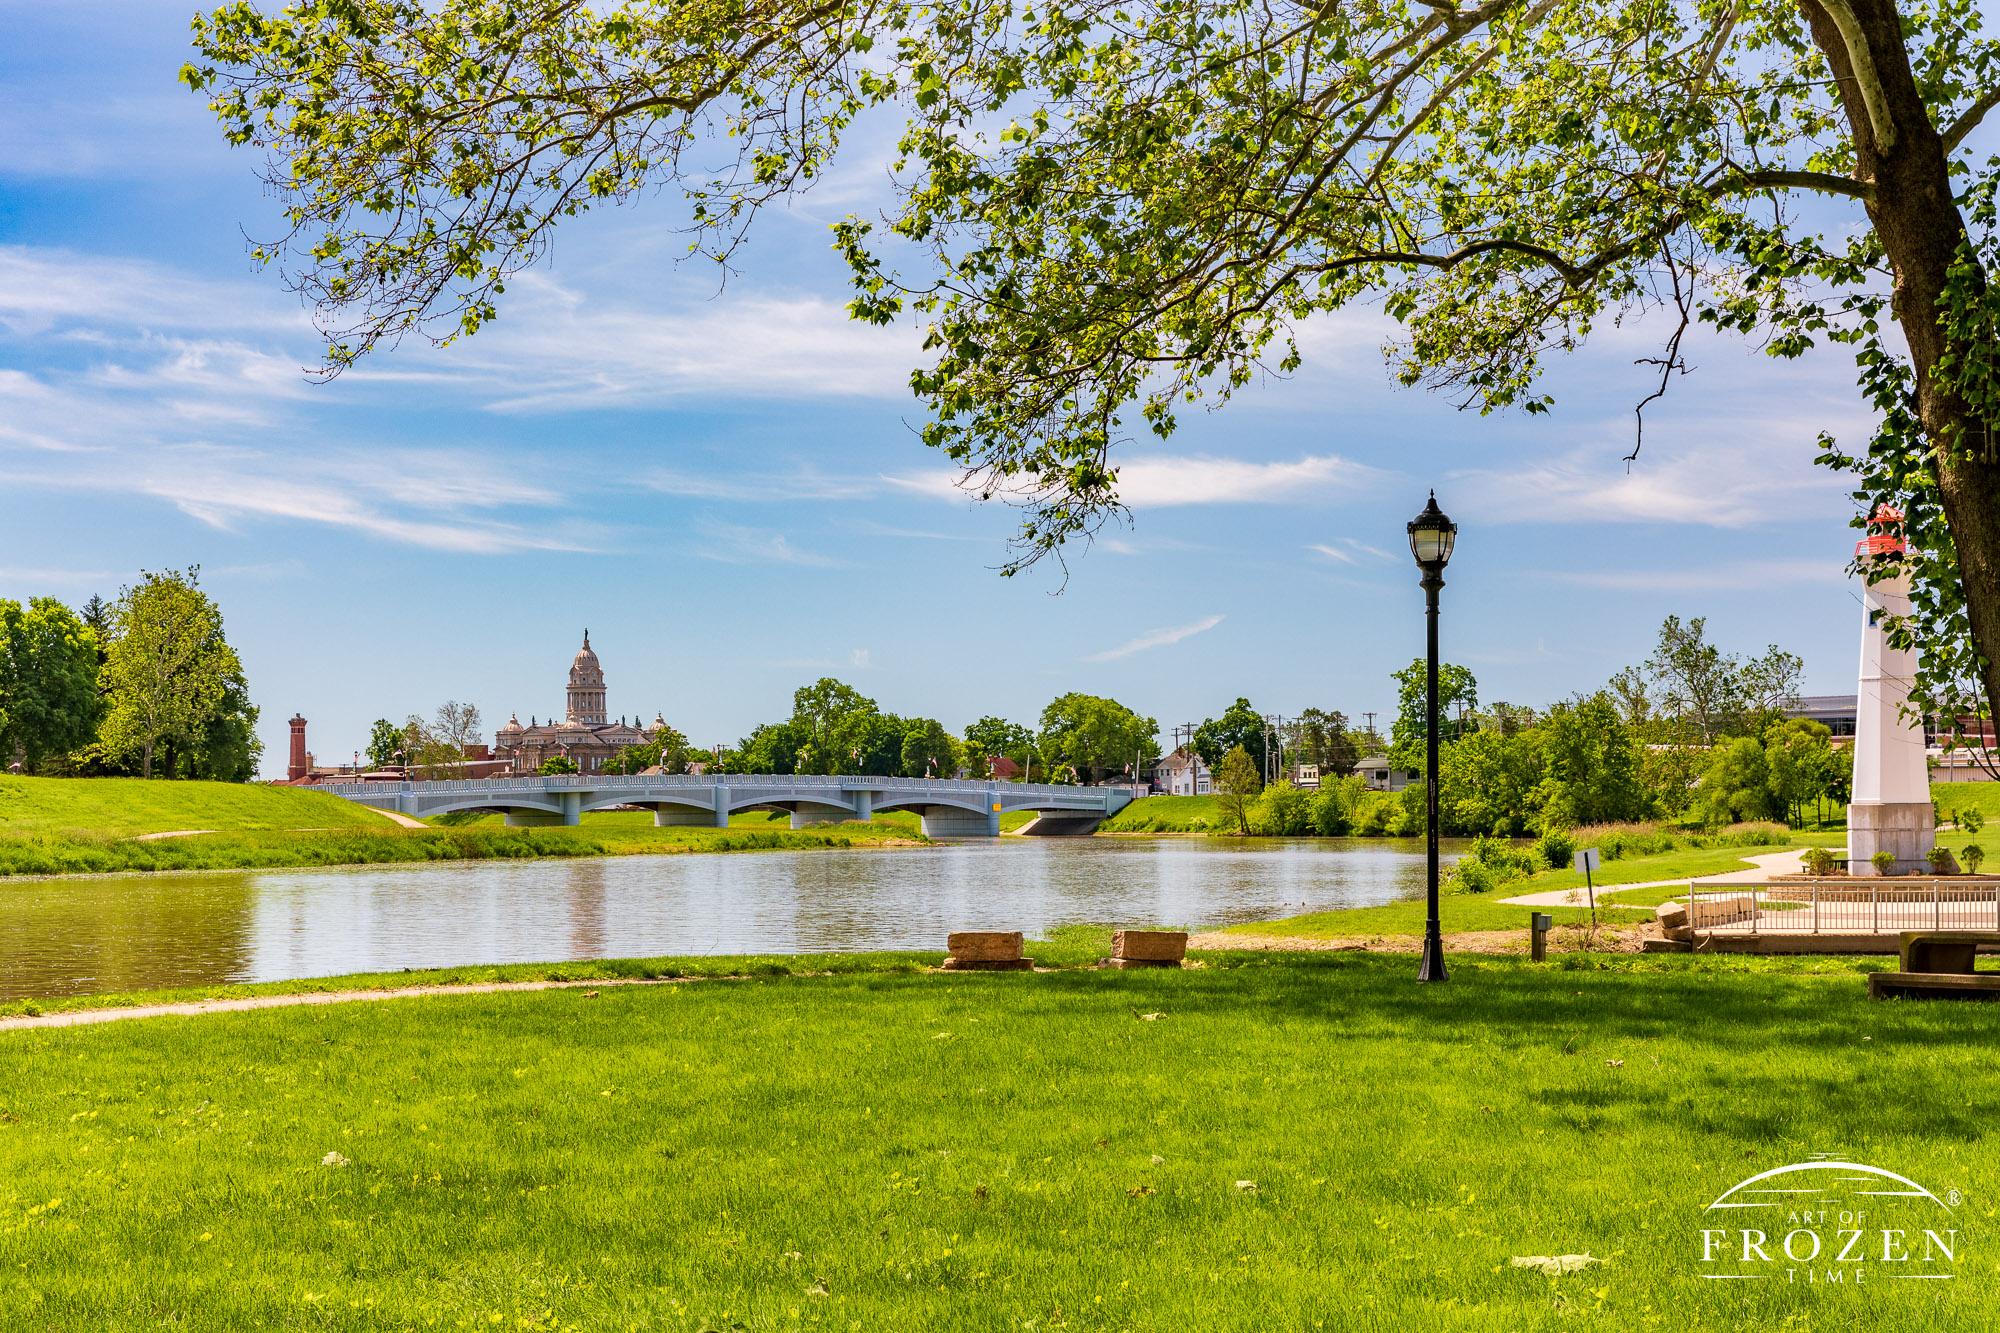 A summer scene in Troy Ohio from Treasure Island as the Great Miami River flows under sunny blue skies